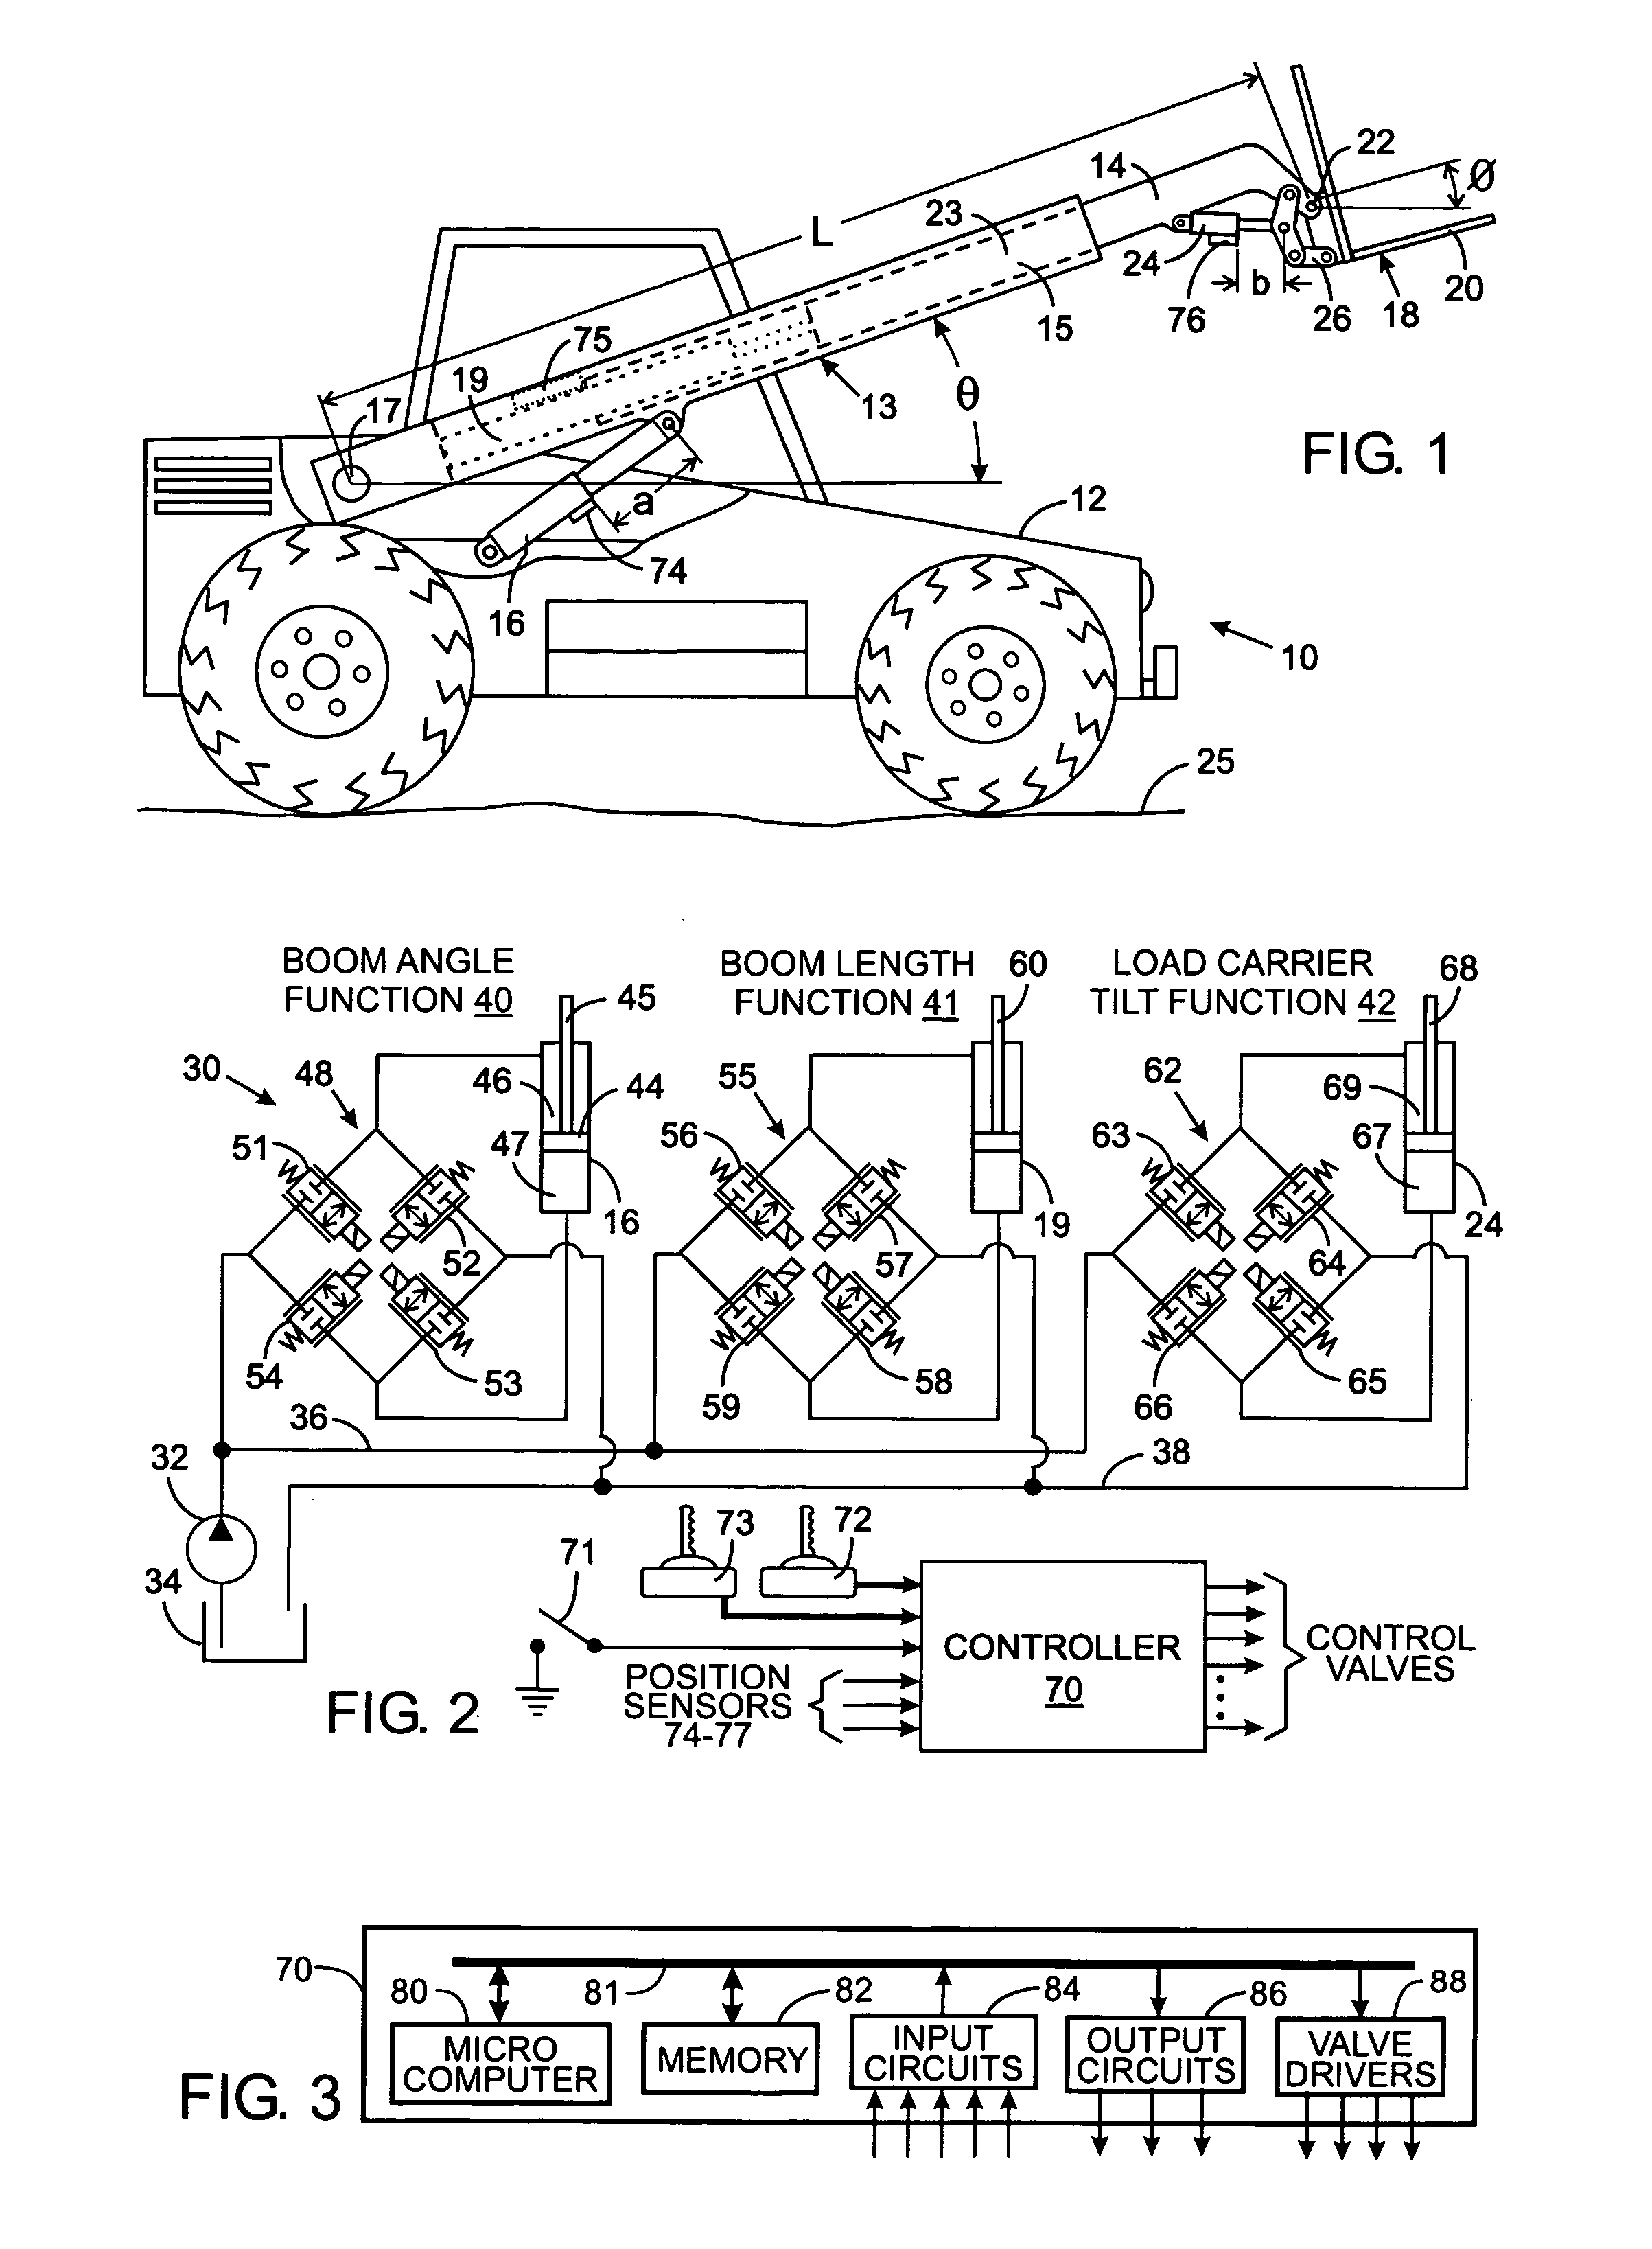 Automatic hydraulic load leveling system for a work vehicle